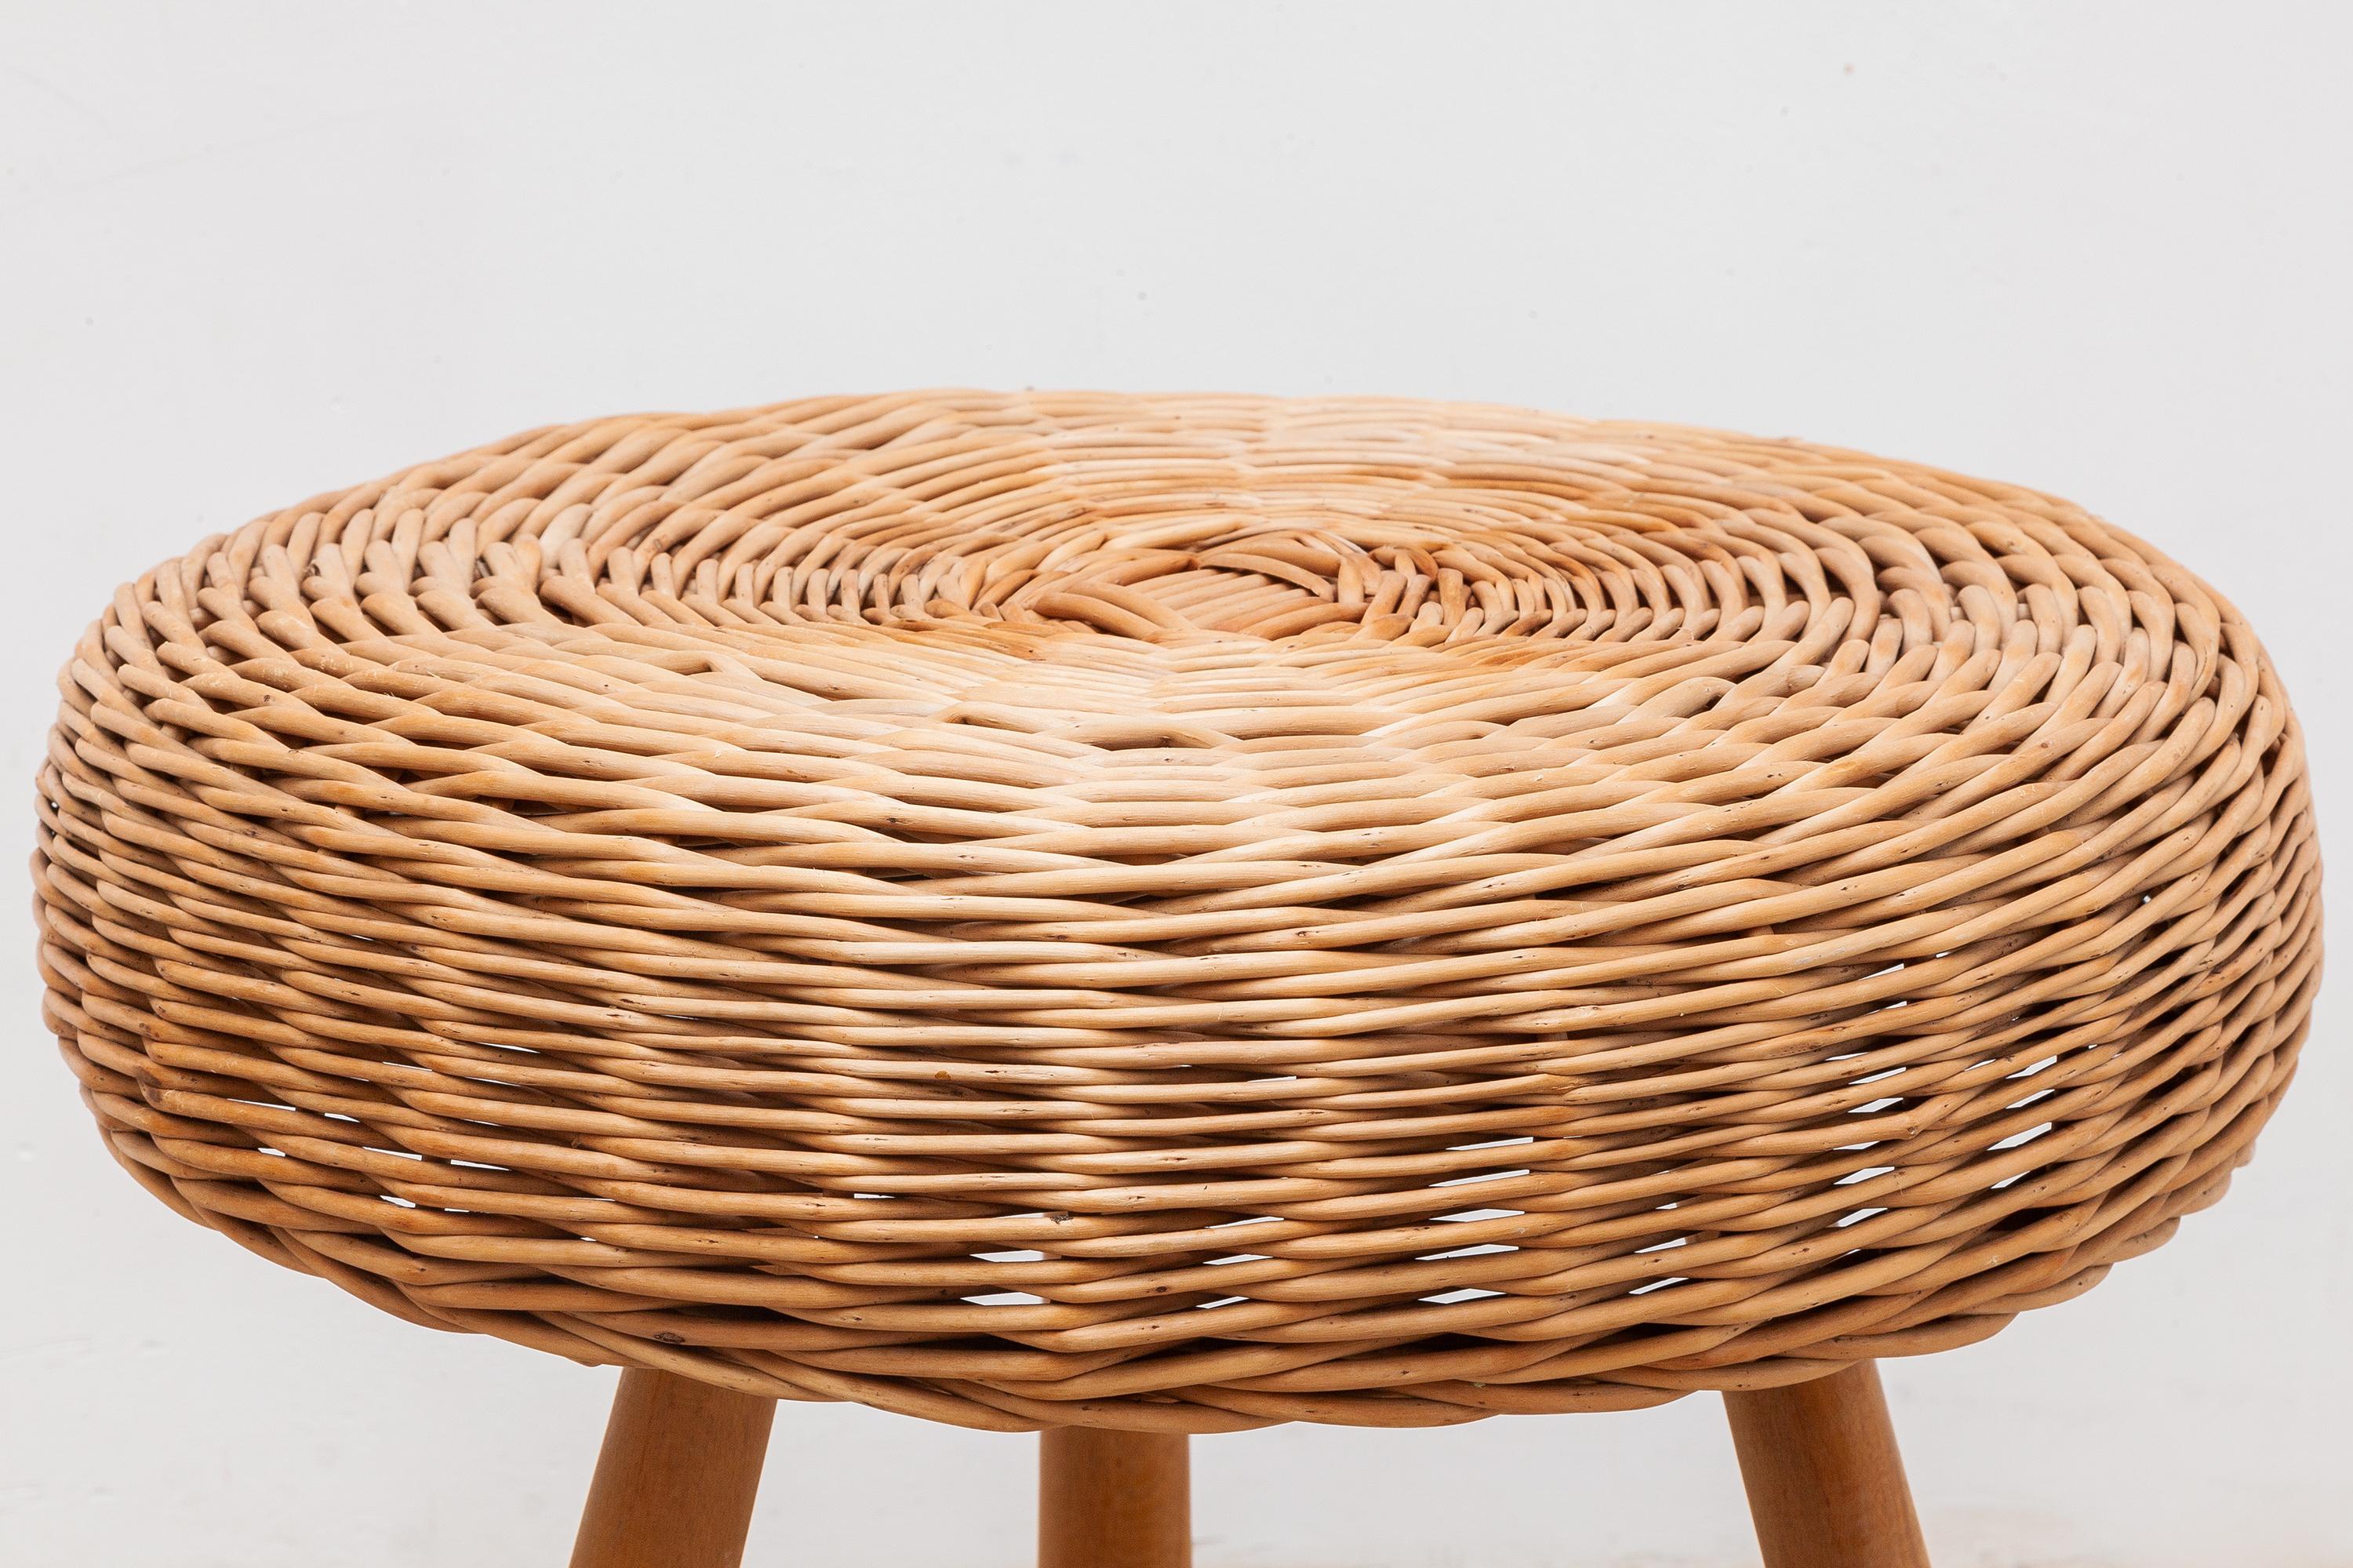 Vintage large rattan stool designed by Tony Paul. Can be used as footstool, seating or table. Tapered wooden legs. The legs can screw off.
Dimension: Large stool: 47W x 44H cm. In original good condition.


About the Designer: American